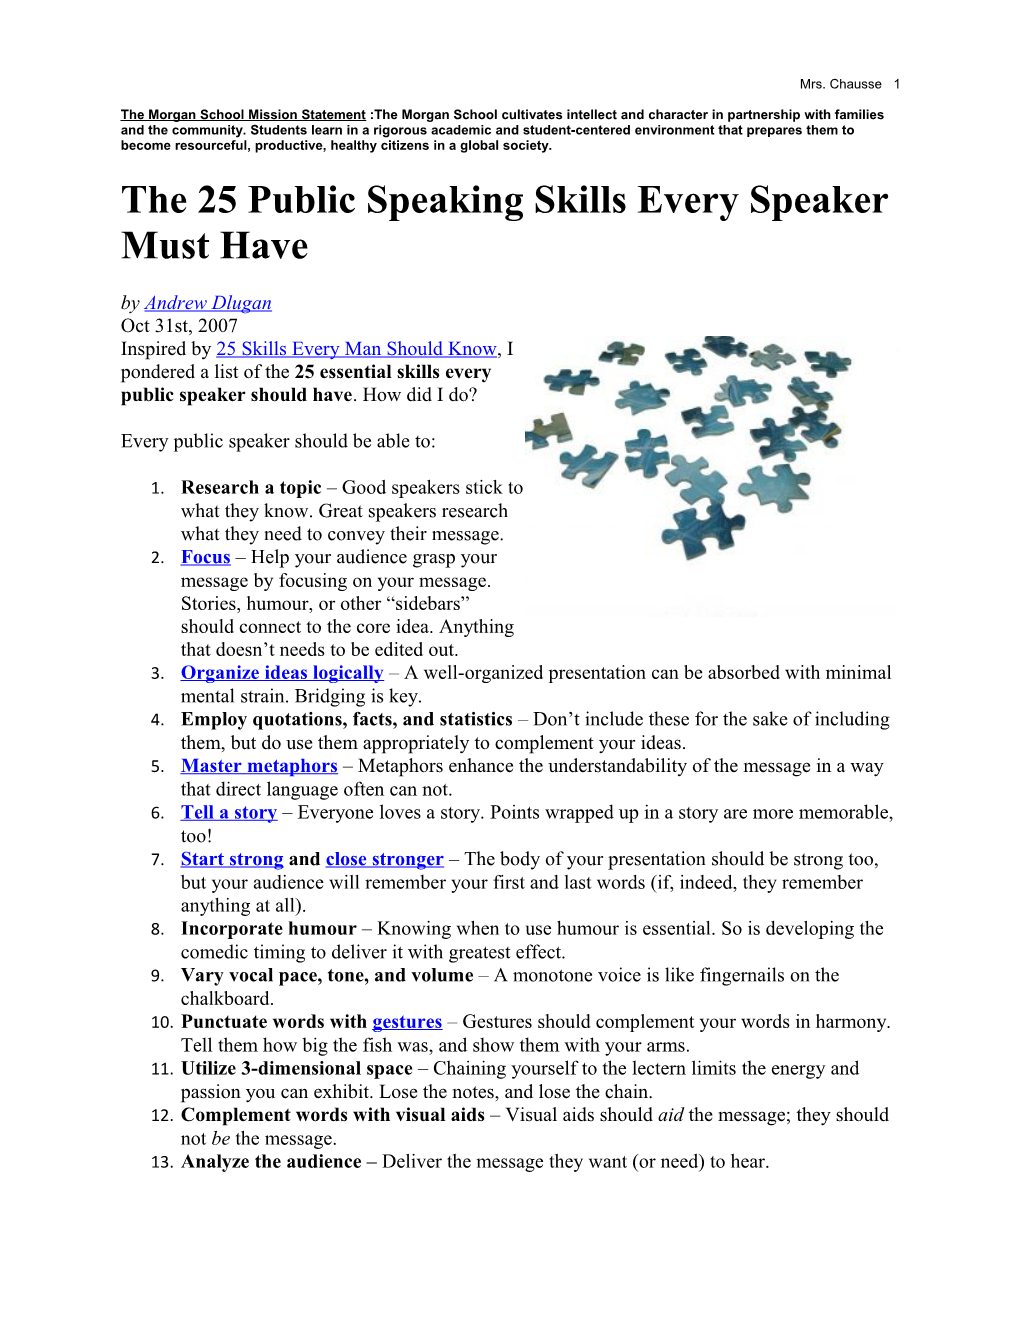 The 25 Public Speaking Skills Every Speaker Must Have